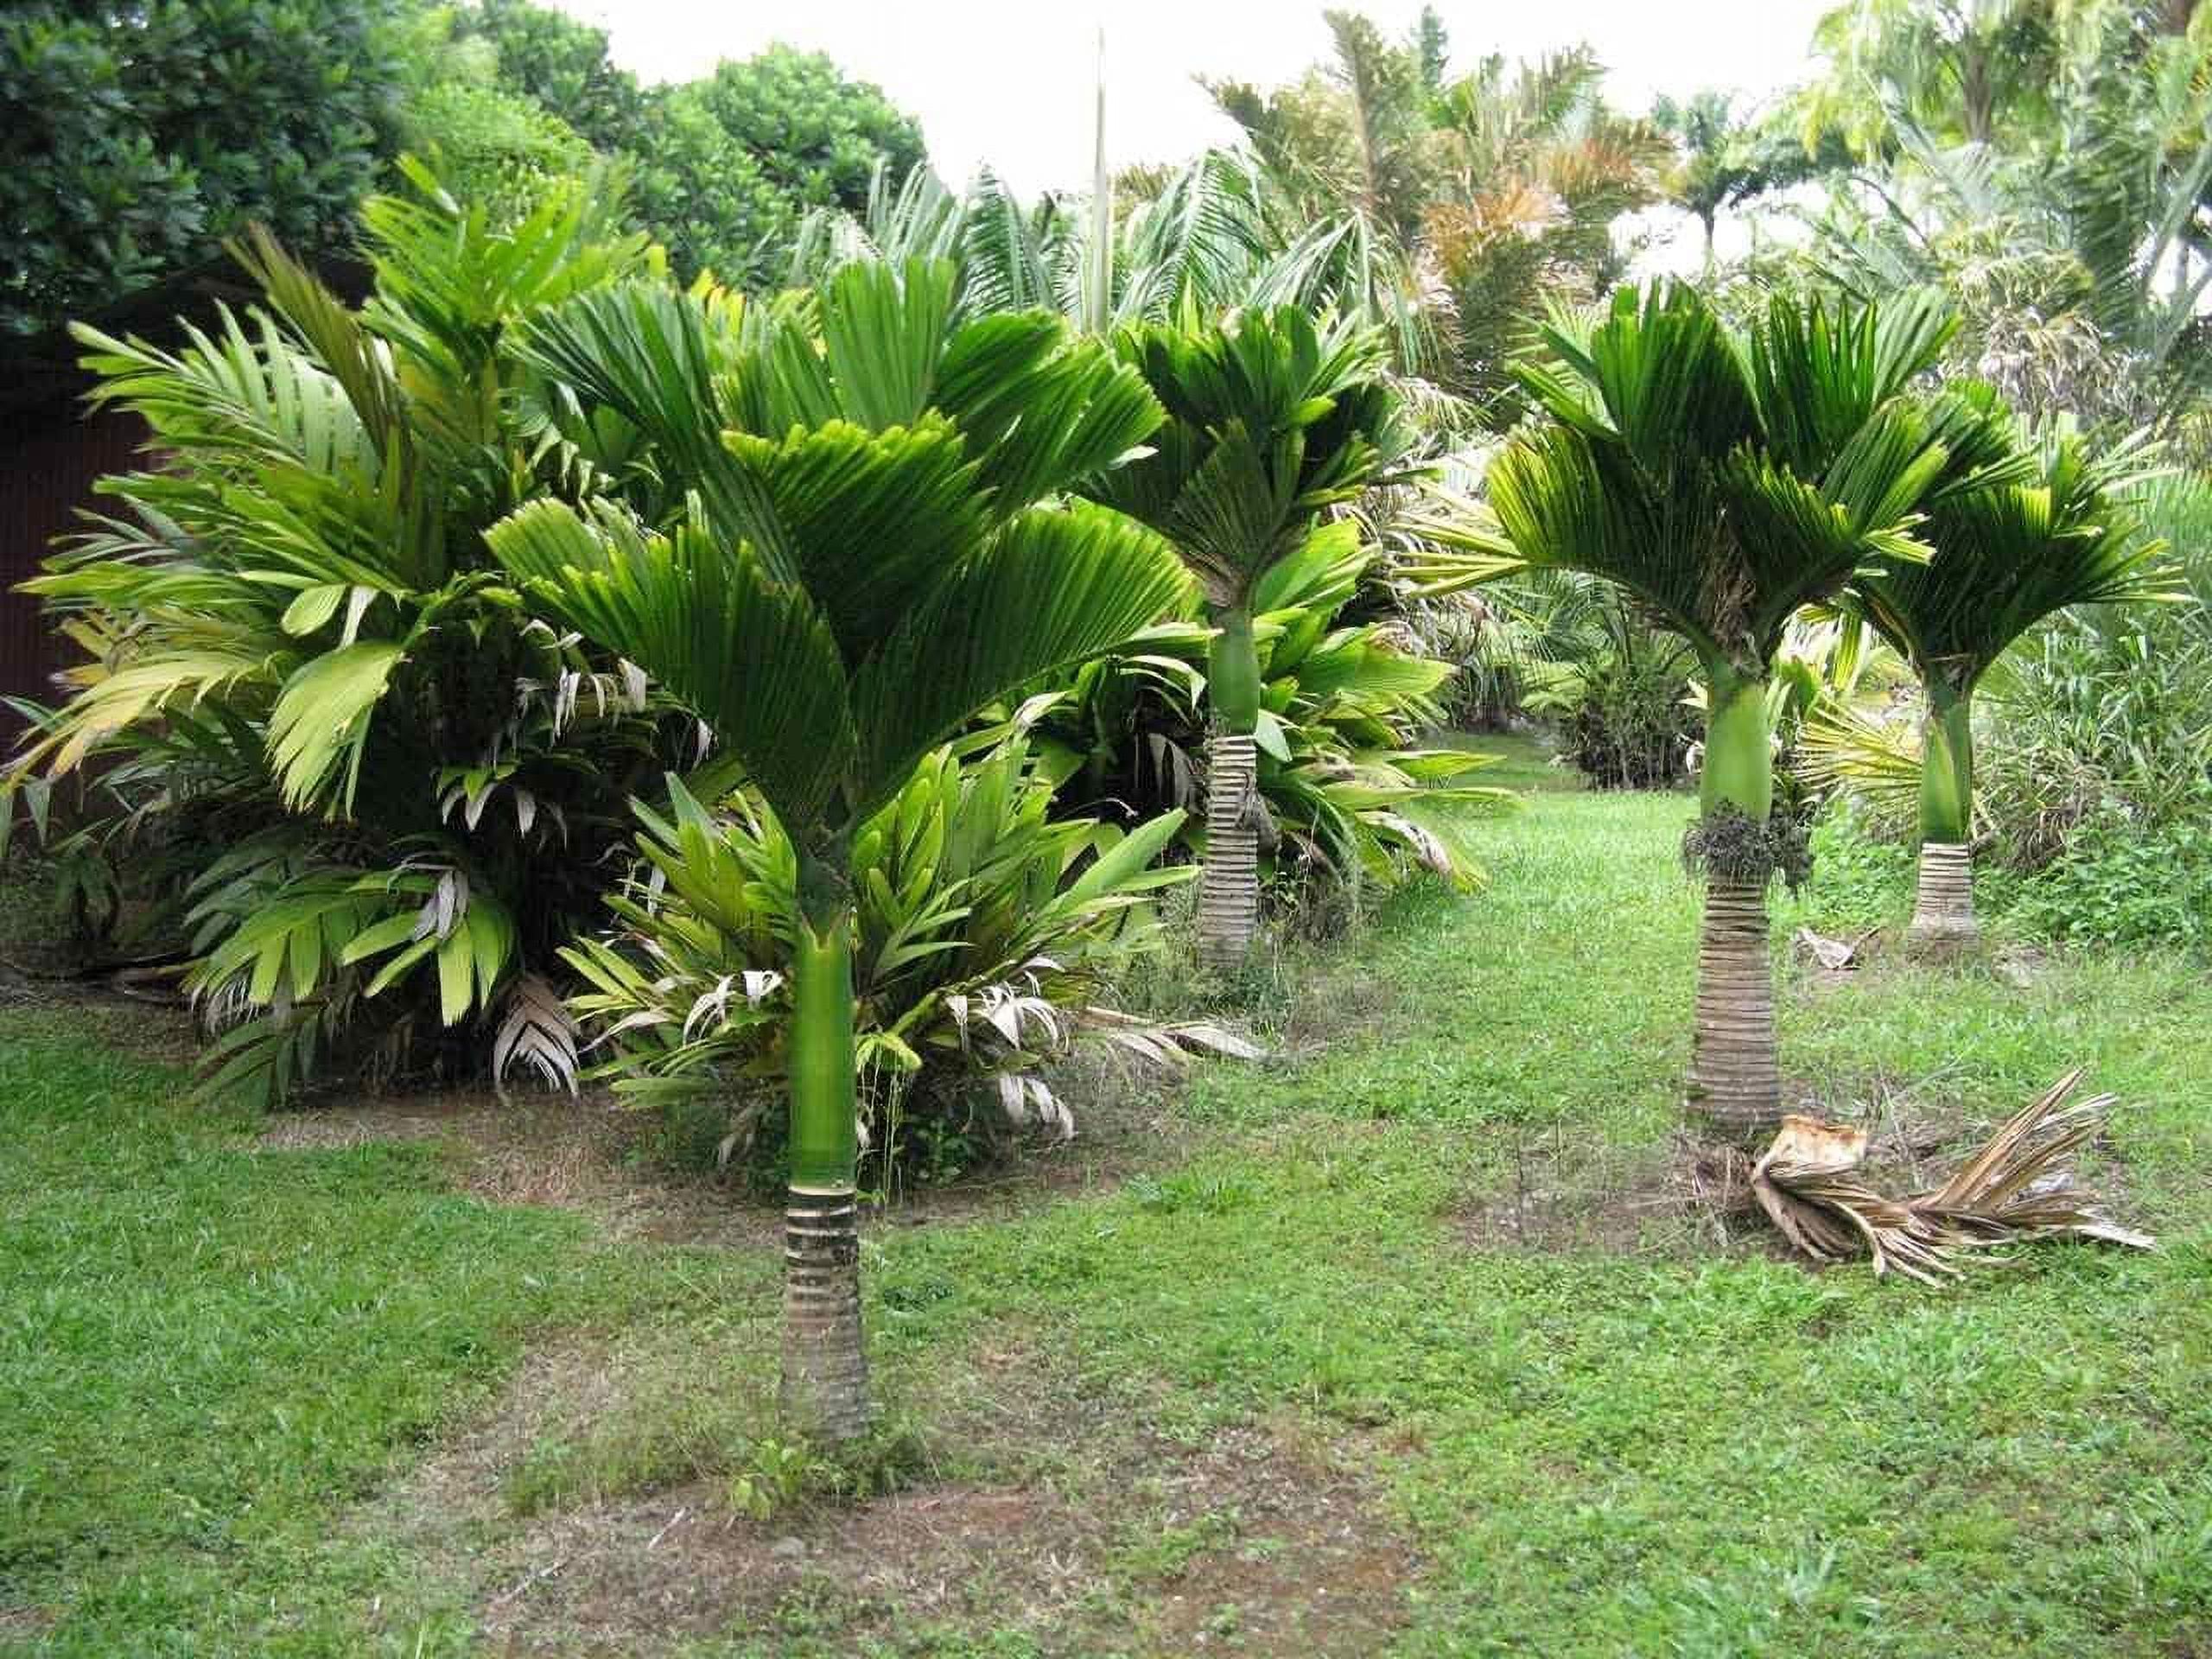 Dwarf Areca Catechu Palm - Live Plant in a 10 Inch Pot - Areca Catechu 'Dwarf' - Breathtaking Ornamental Palms from Florida for The Home and Patio - image 5 of 5